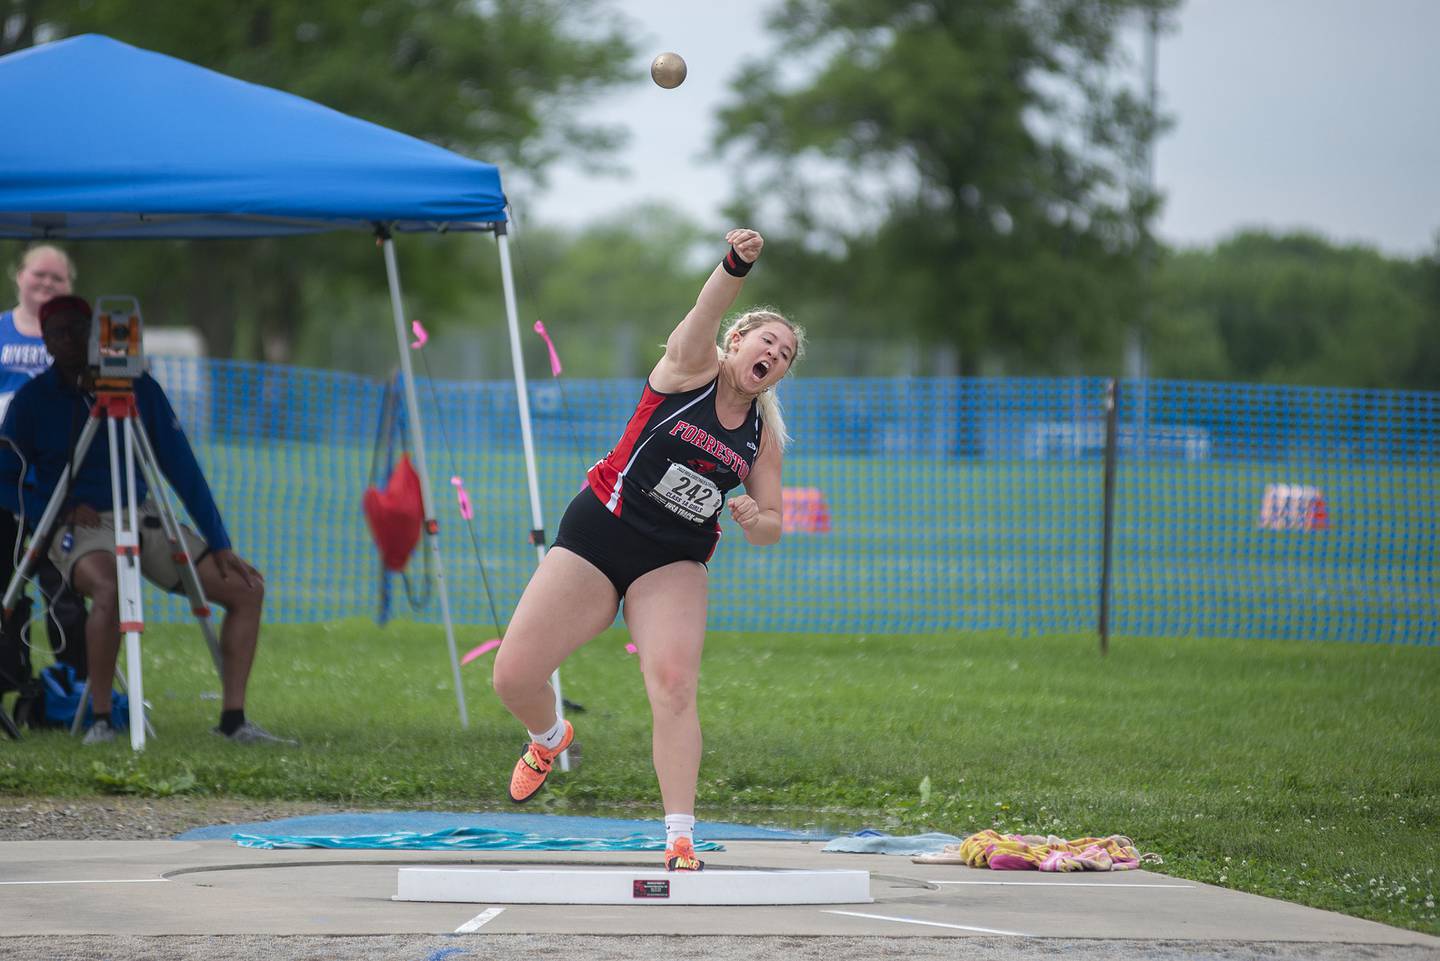 Sydni Badertscher of Forreston competes in the 1A shot put finals during the IHSA girls state championships, Saturday, May 21, 2022 in Charleston.